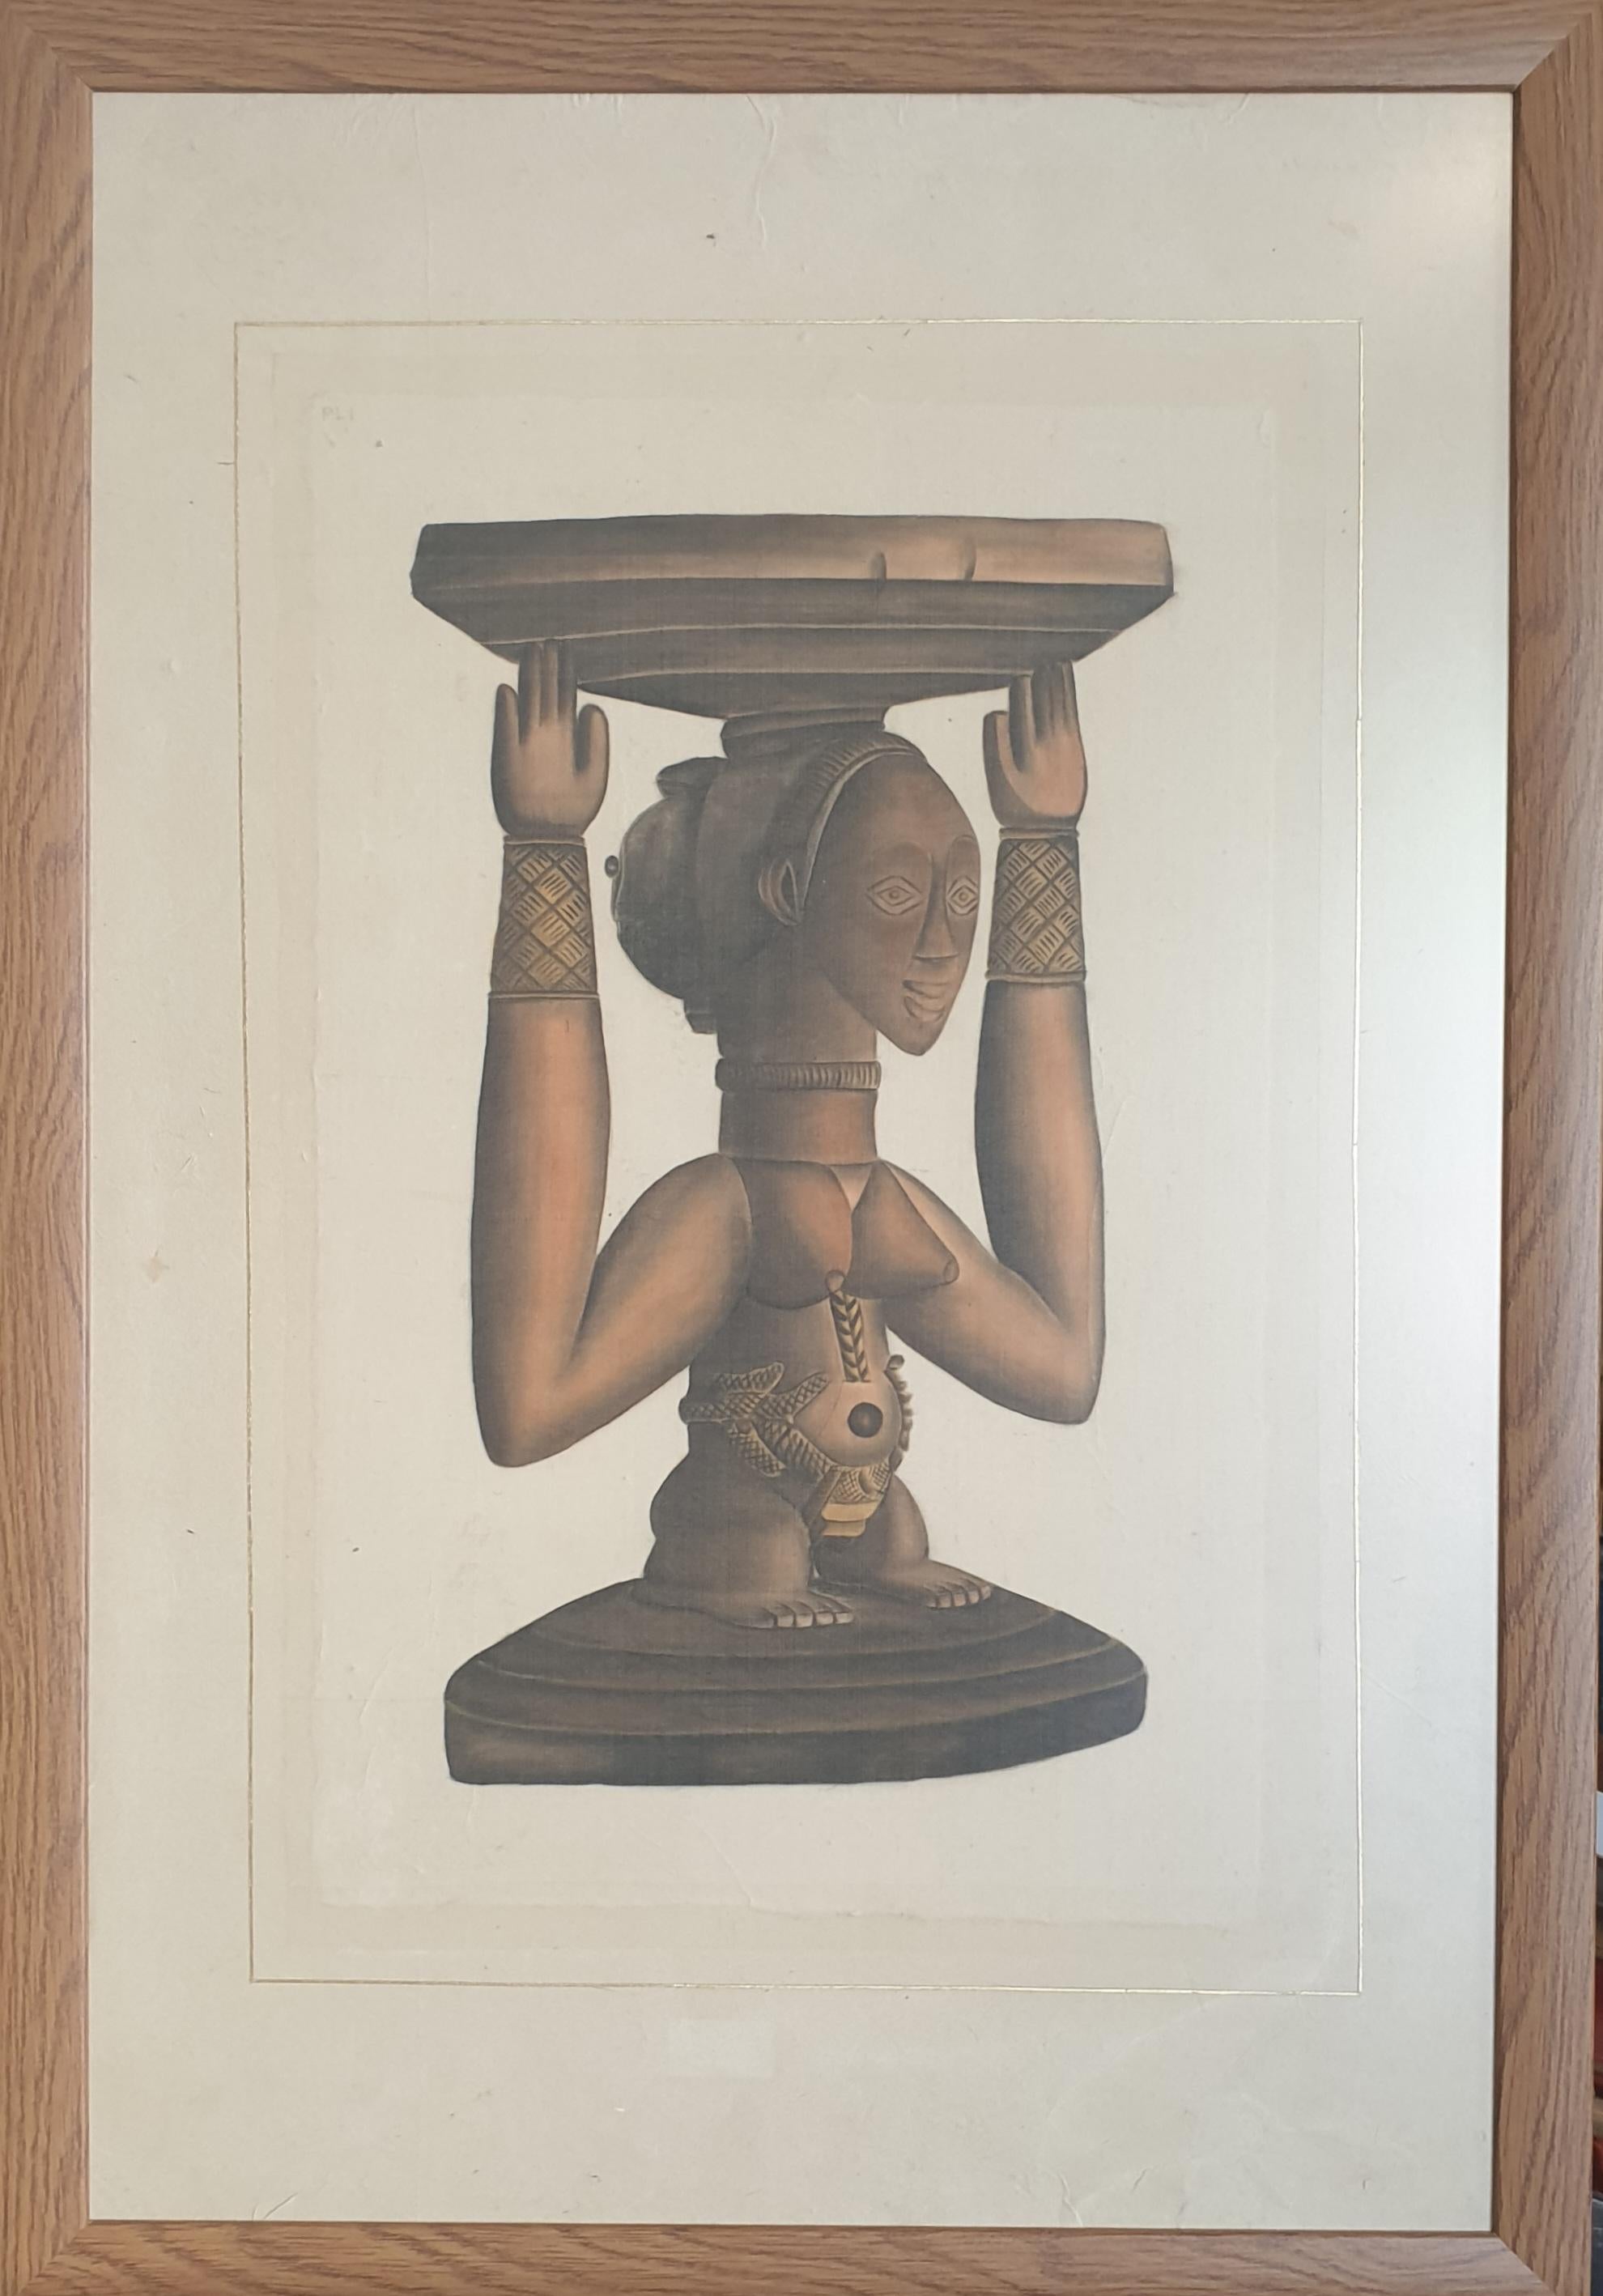 Watercolour on Handmade Paper Laid on Vélin d'Arches of an African Sculpture. - Art by La Roche Laffitte